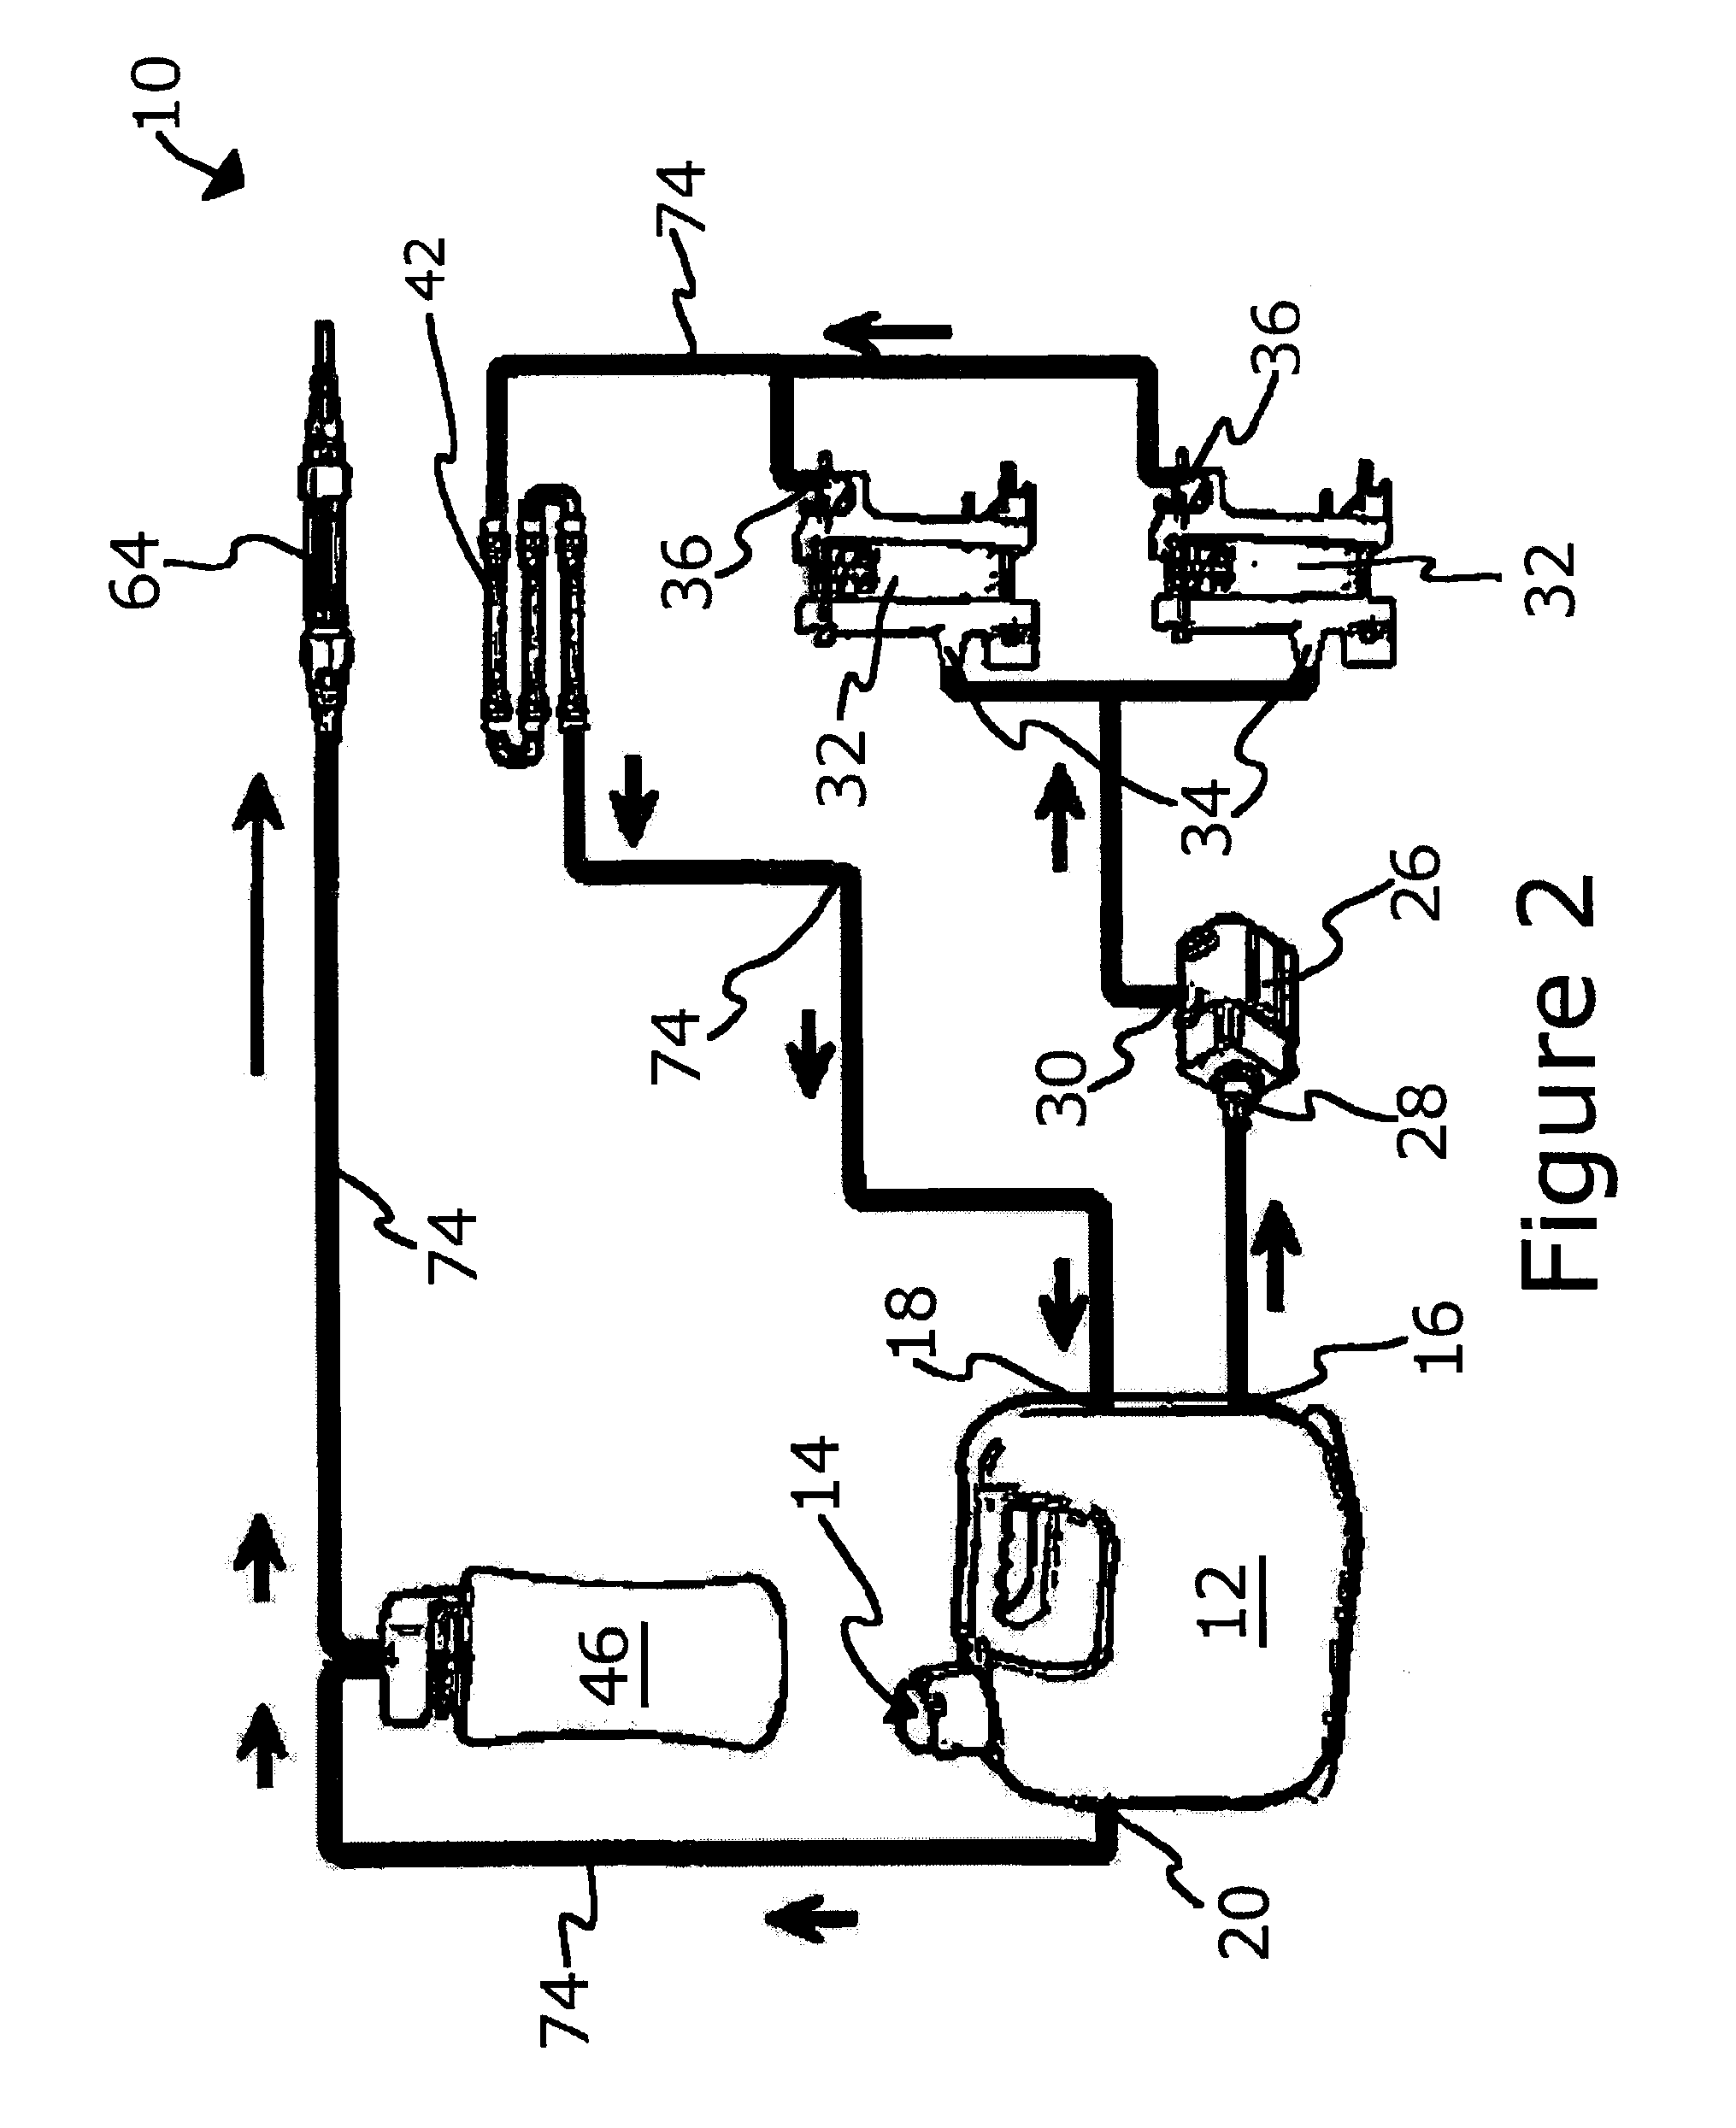 Home heating system utilizing electrolysis of water